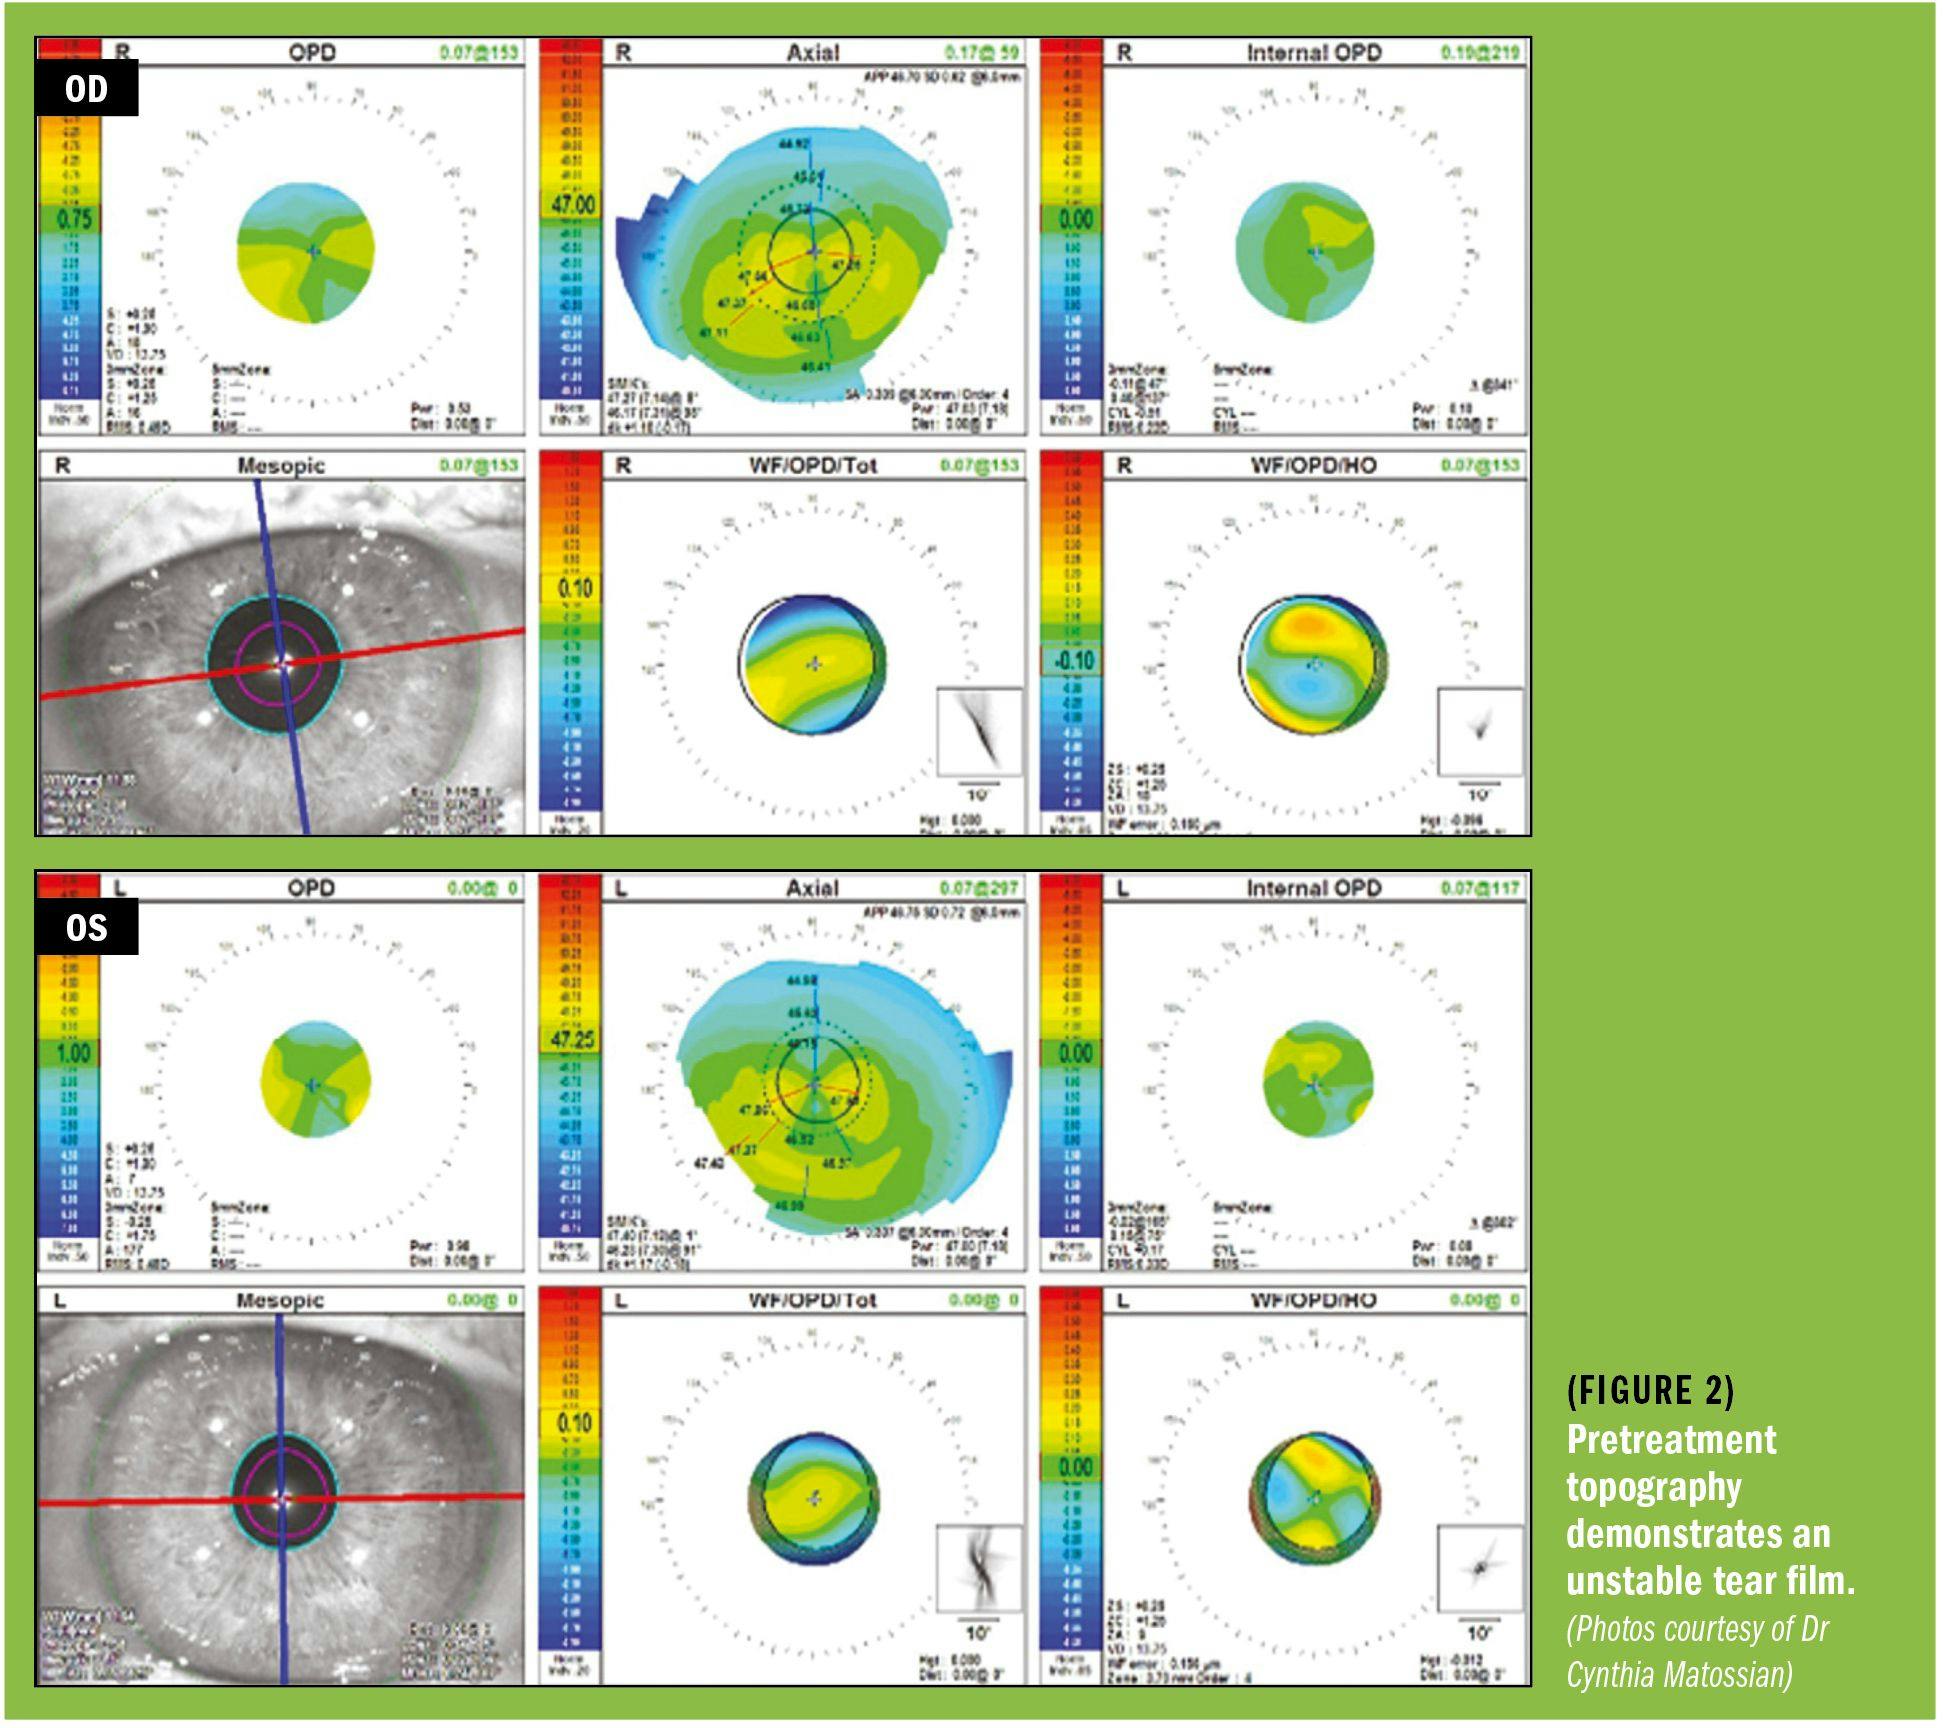 Several images of pretreatment tomography showing unstable tear film